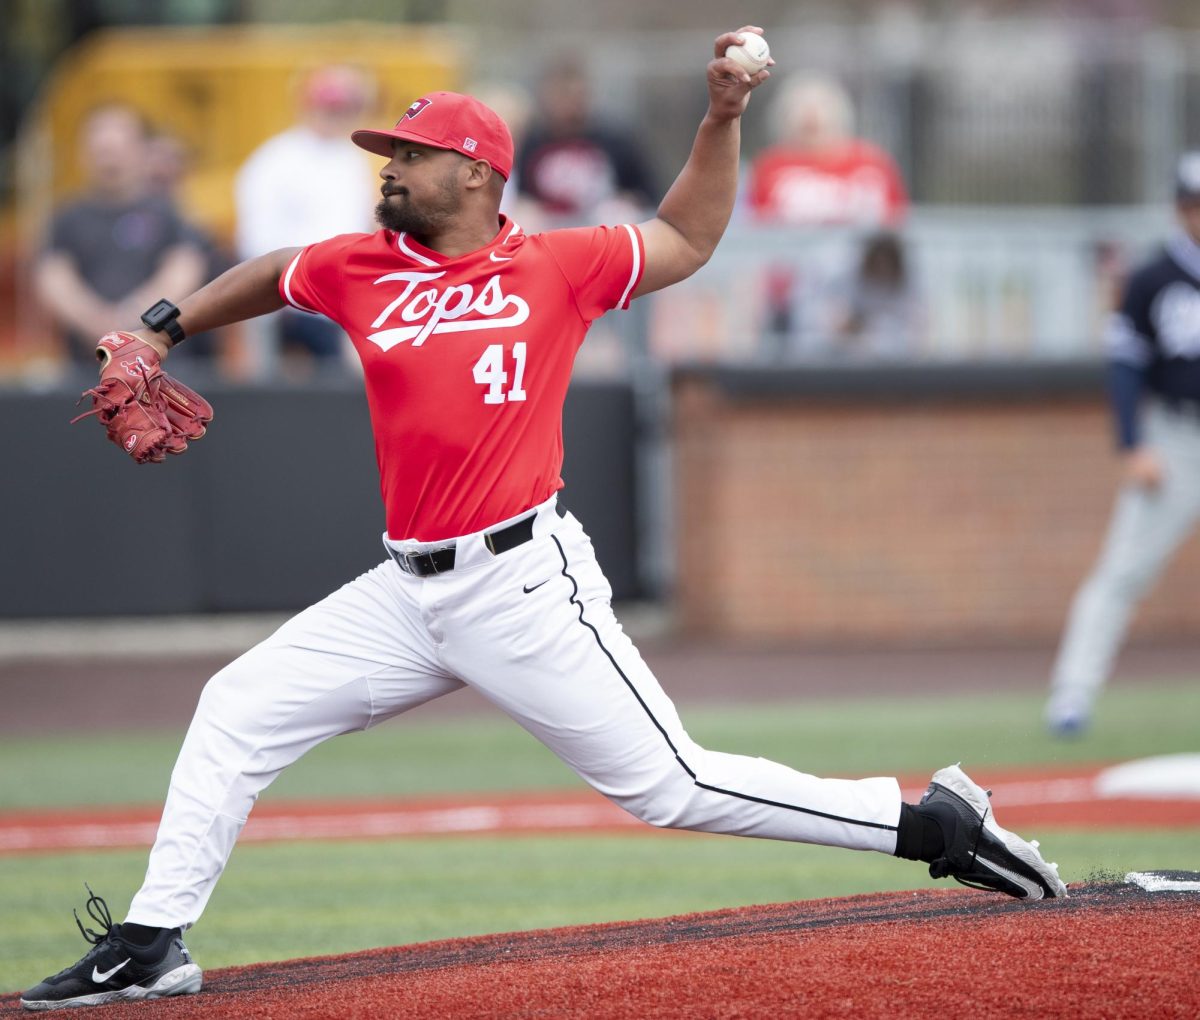 Pitcher+Lane+Diuguid+%281%29+throws+a+pitch+during+WKU%E2%80%99s+game+against+Dallas+Baptist+University+on+Sunday%2C+April+7%2C+2024.+WKU+lost+3-0.